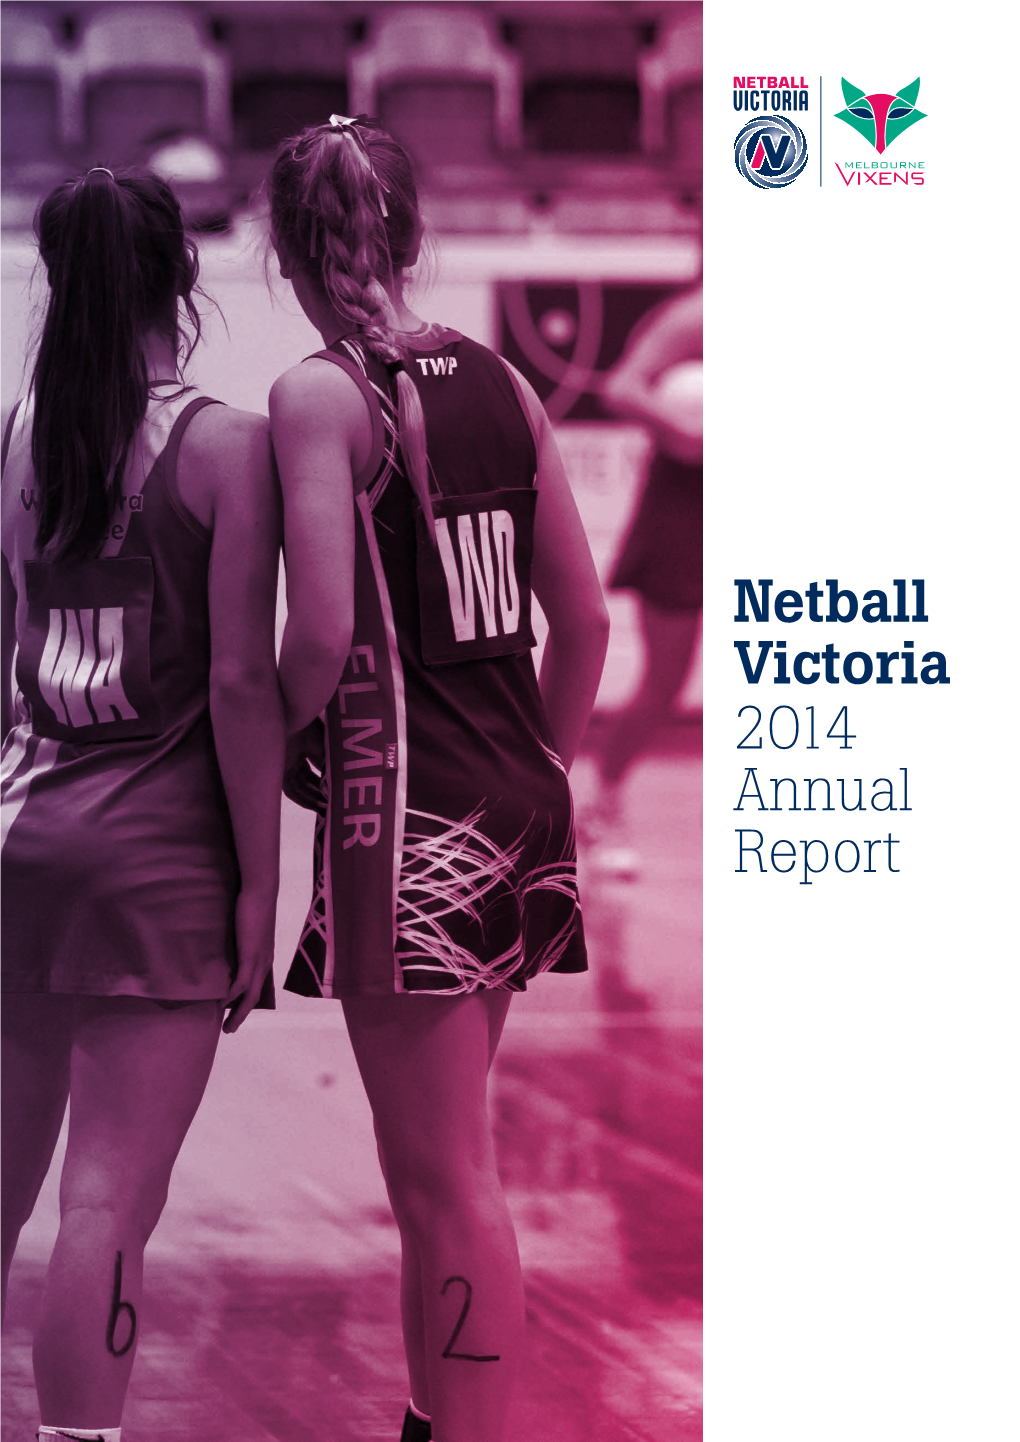 Netball Victoria 2014 Annual Report We Exist to Enrich Victorian Communities Contents Through the Sport of Netball